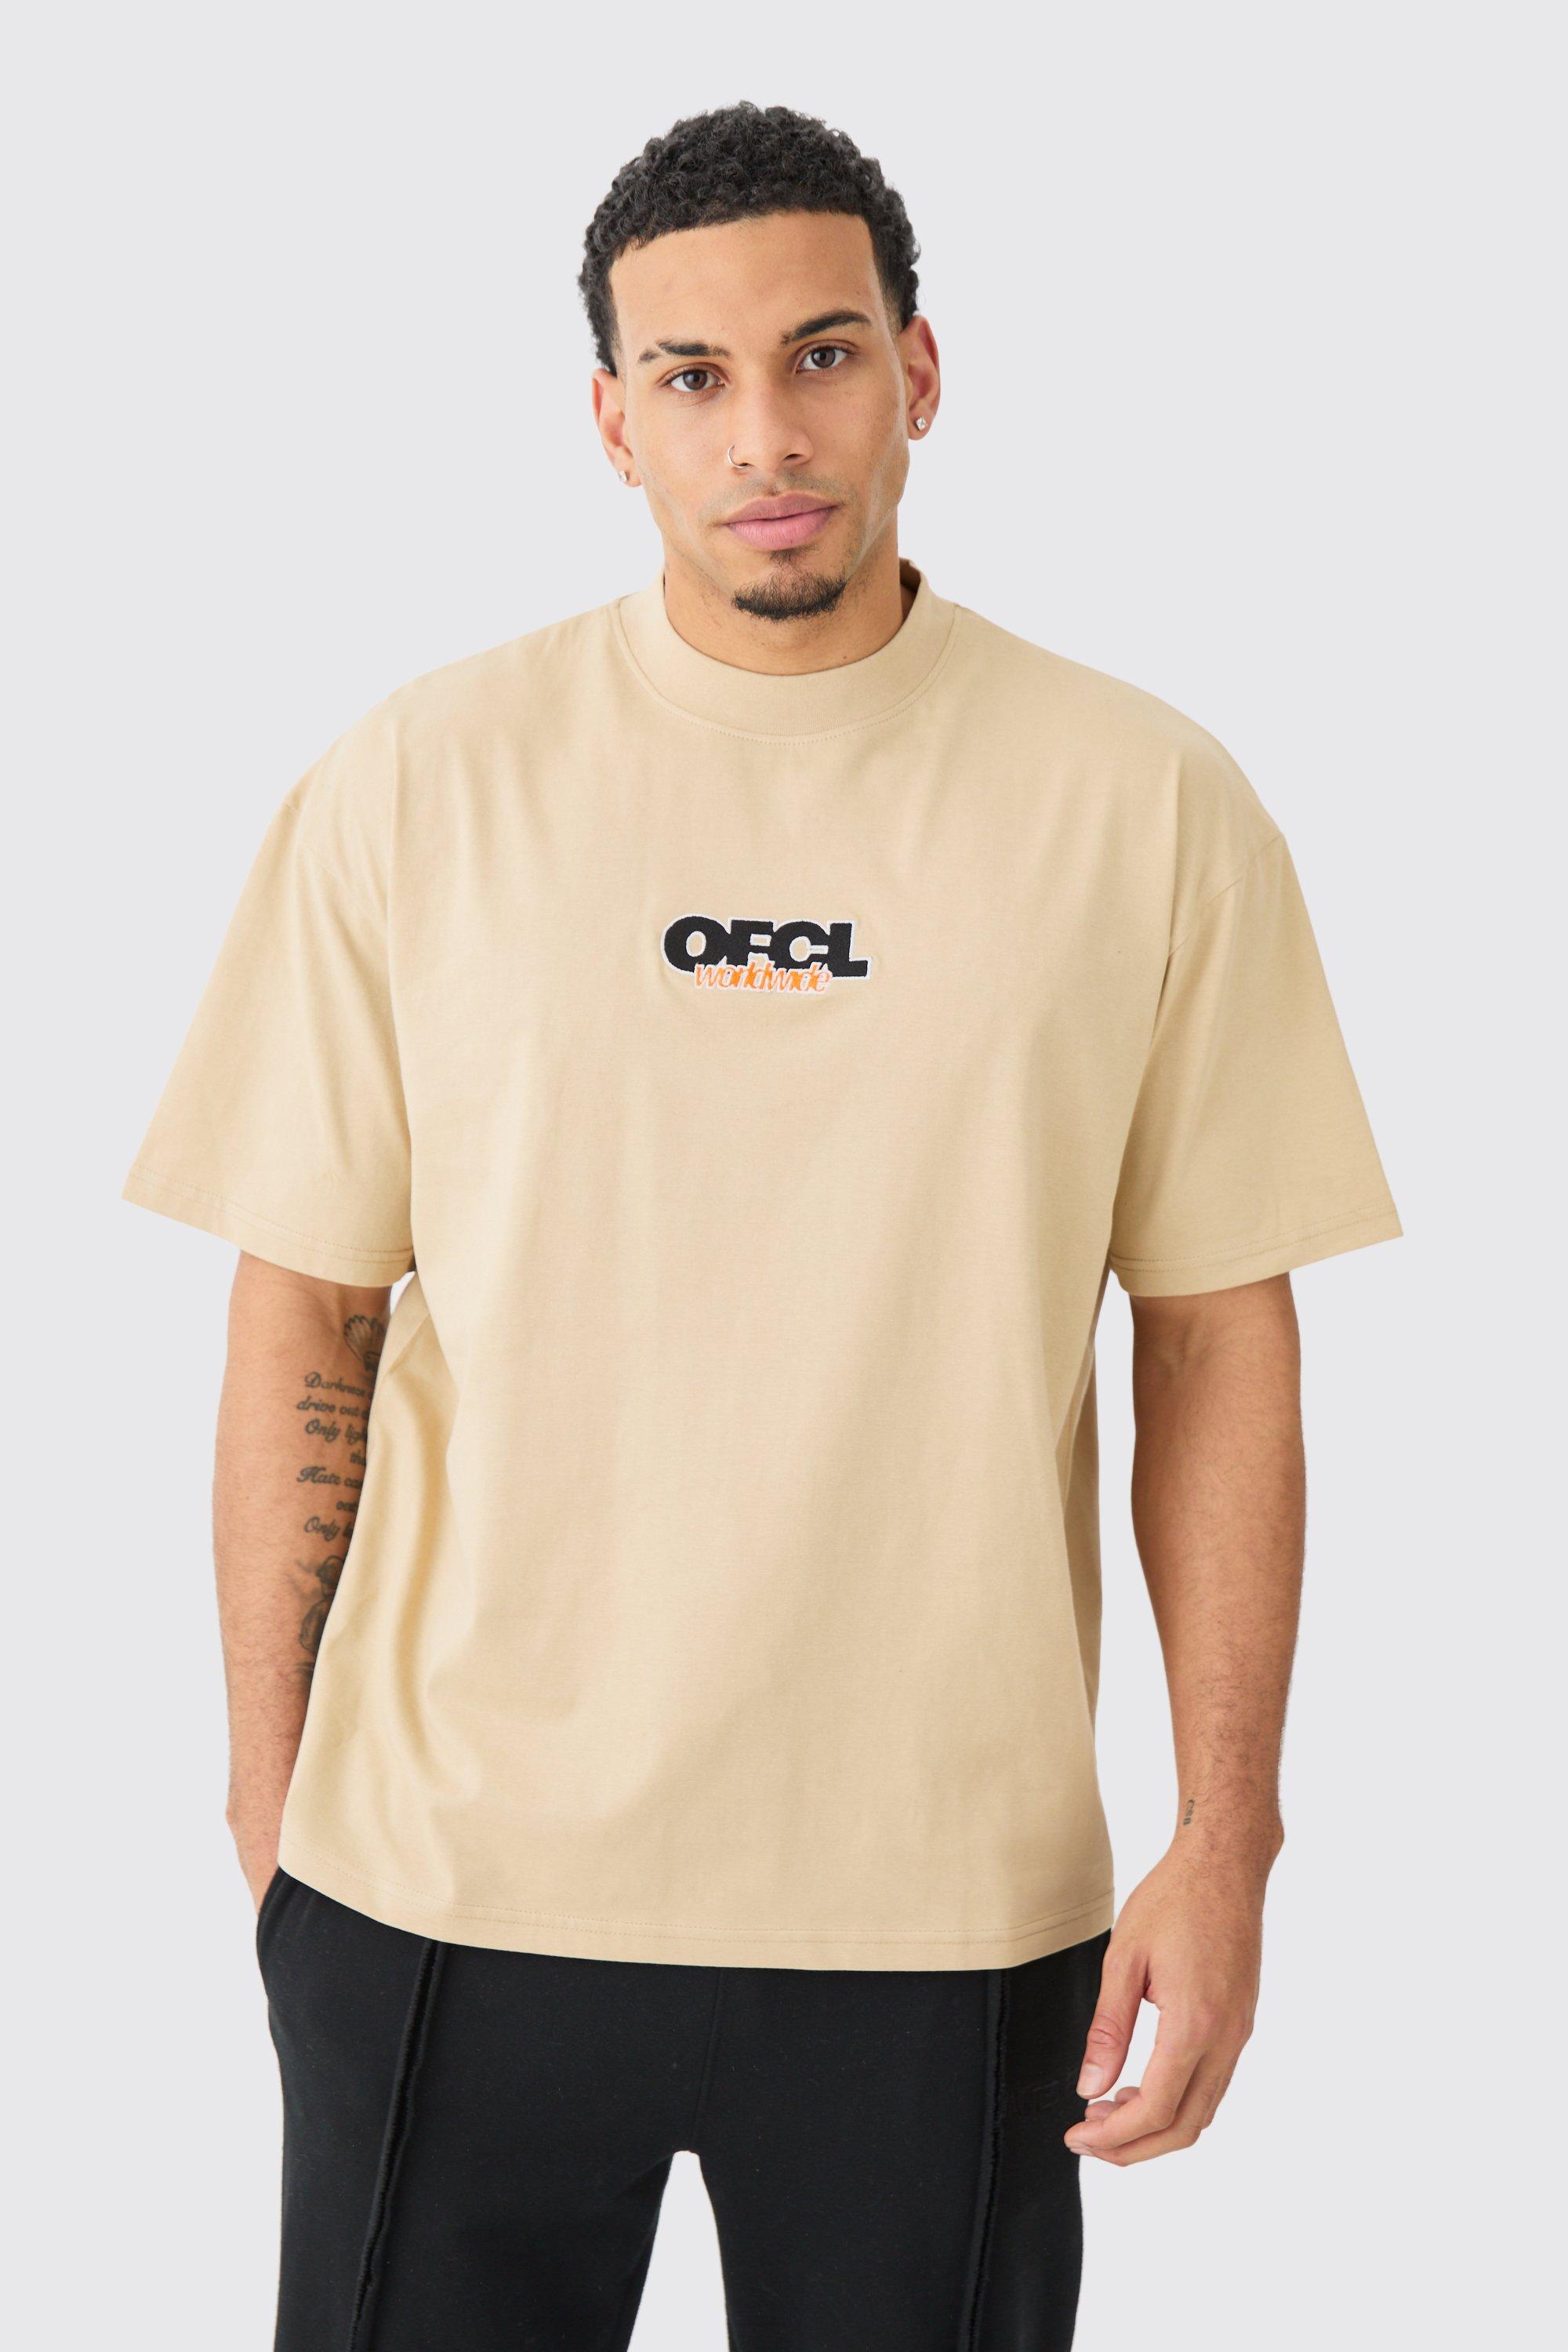 Image of Oversized Extended Neck Ofcl T-shirt, Beige